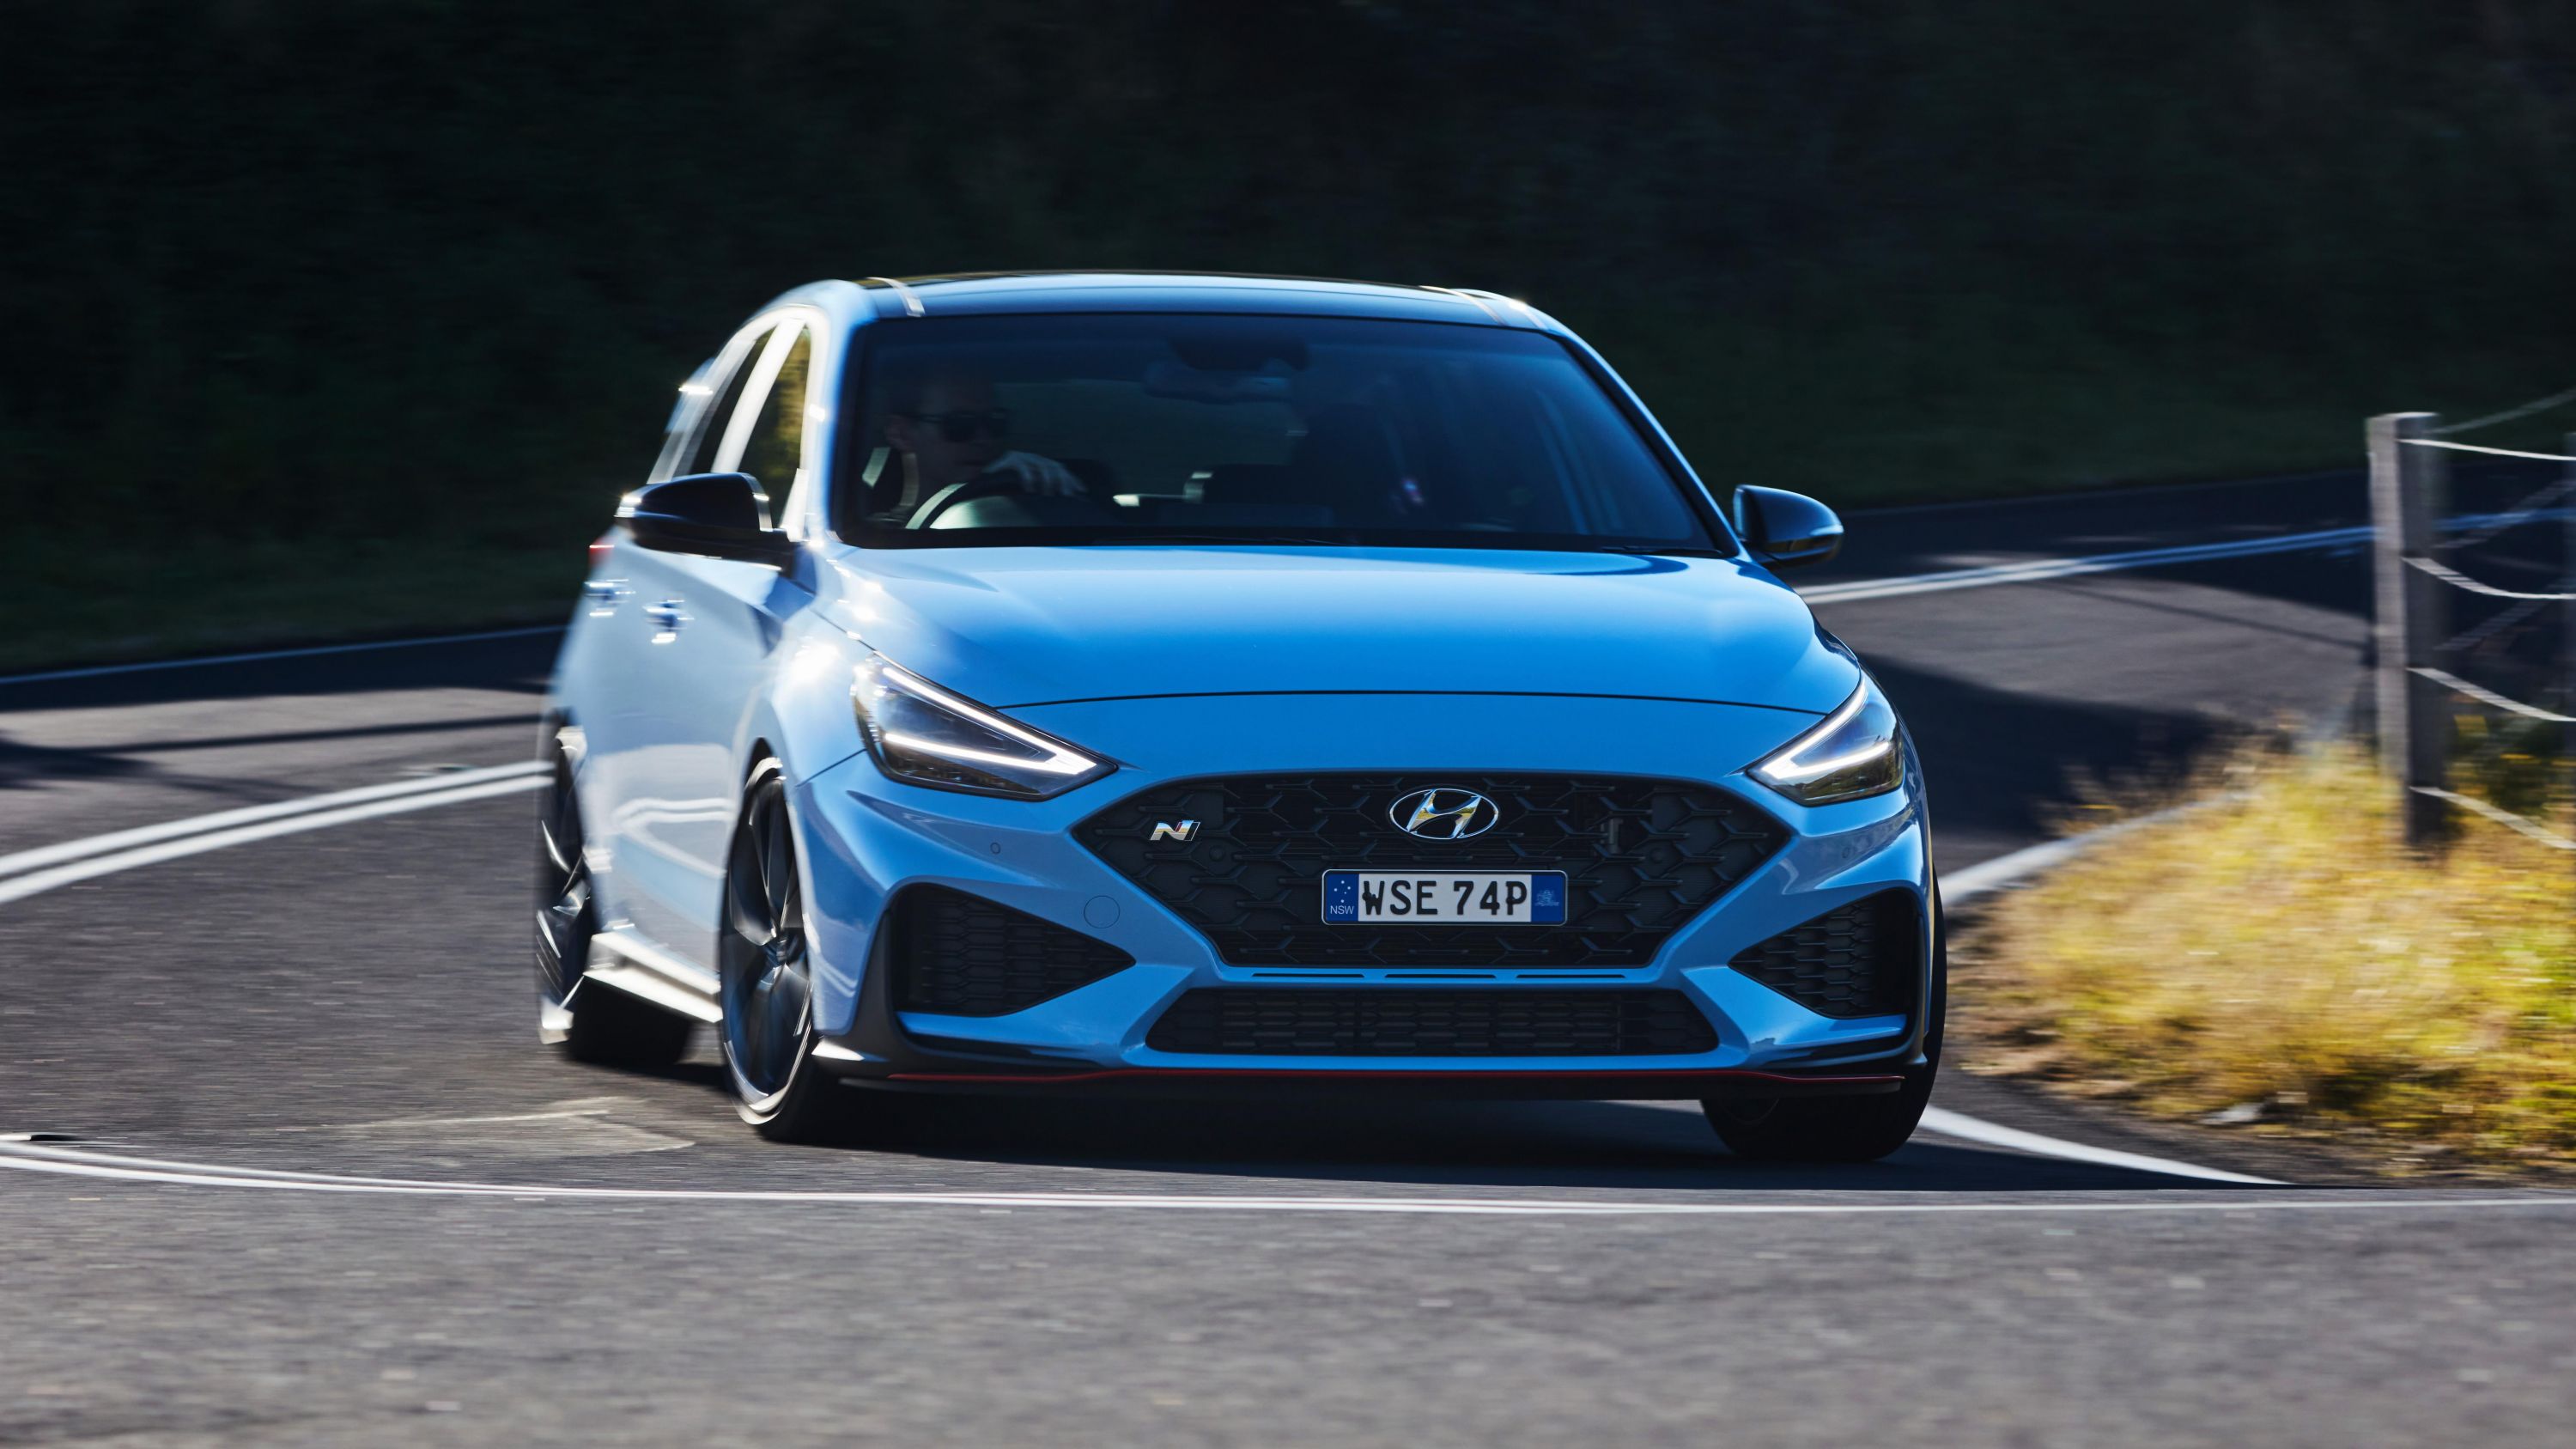 The Hyundai i30N Option wants you to play Spot the Difference